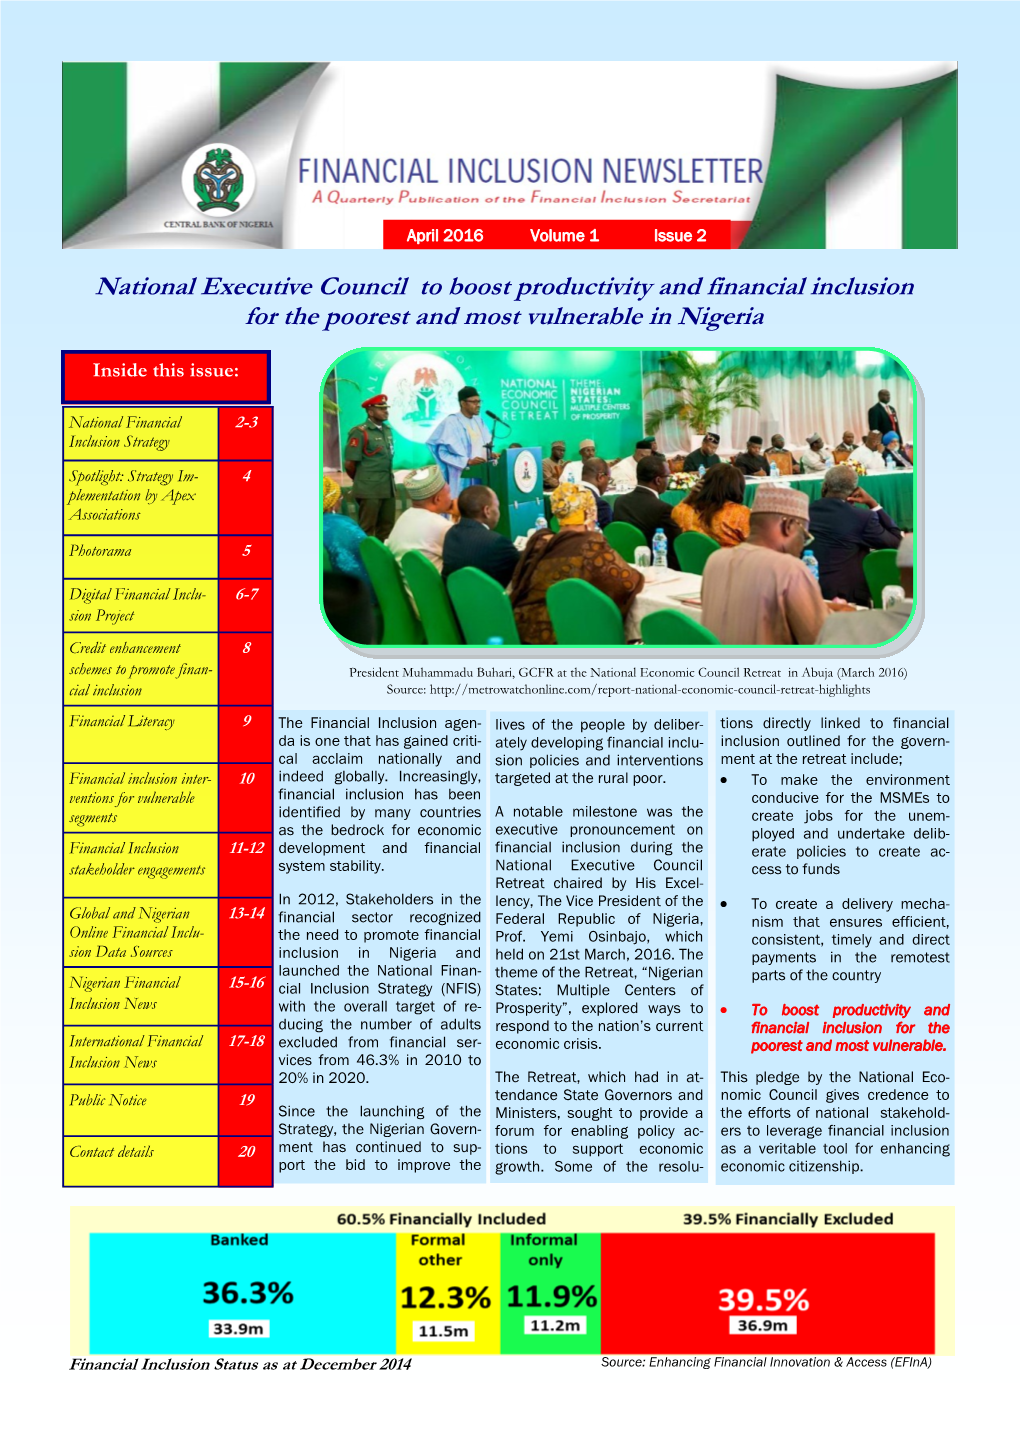 FINANCIAL INCLUSION NEWSLETTER APRIL 2016, Volume 1, Issue 2 CENTRAL BANK of NIGERIA